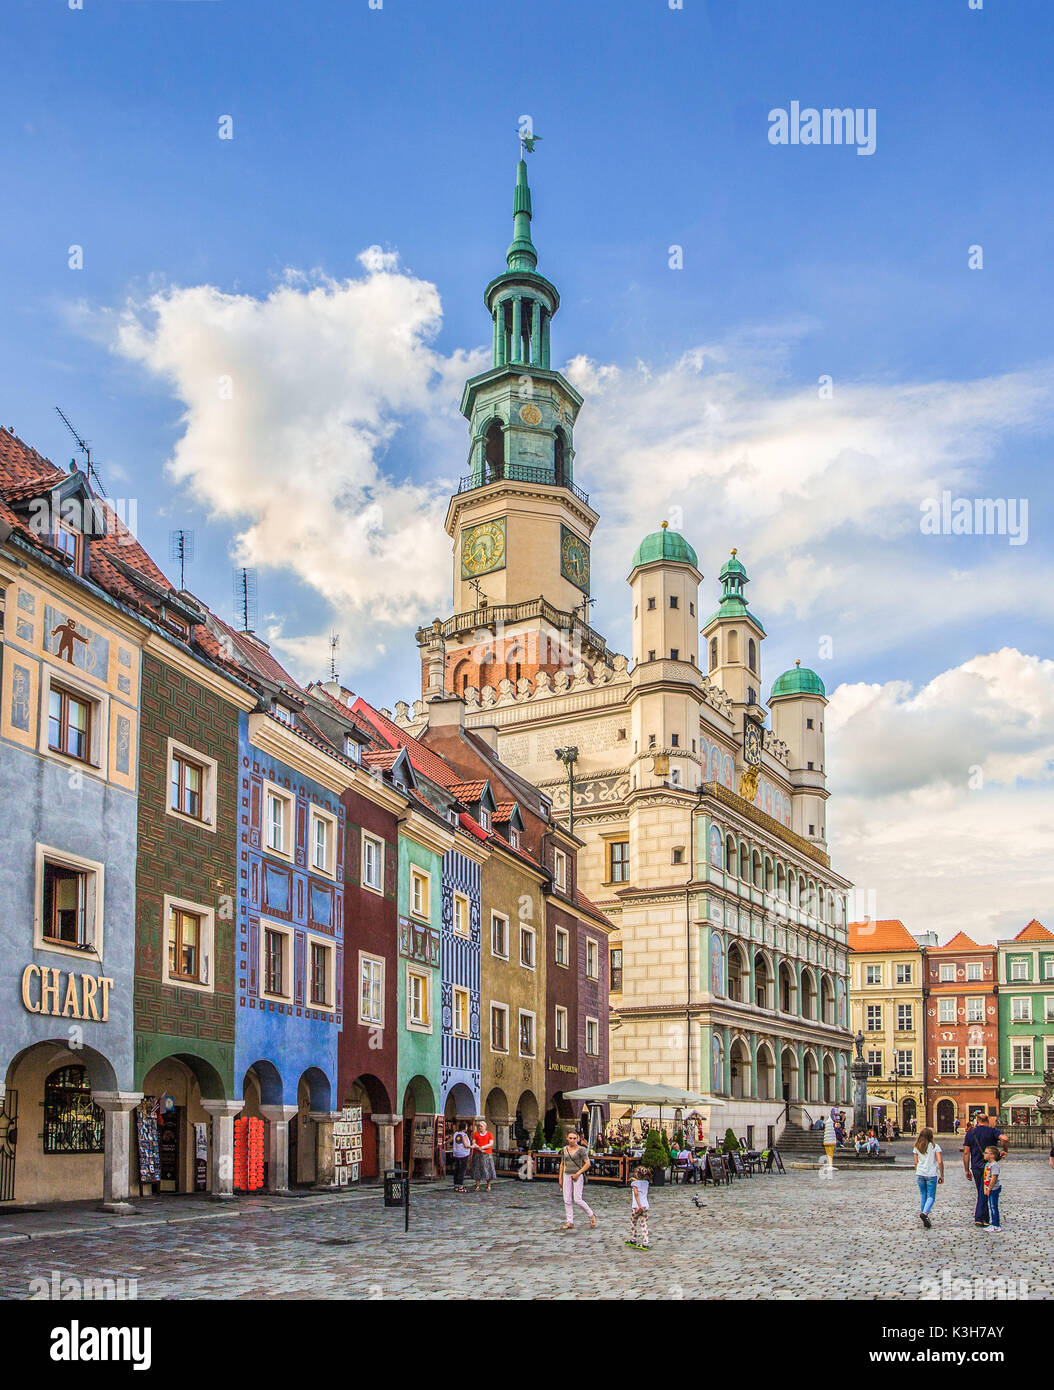 Poland, Poznan City, Stary Rynek, Town Hall Building, Picturesque houses, Old Town Square Stock Photo